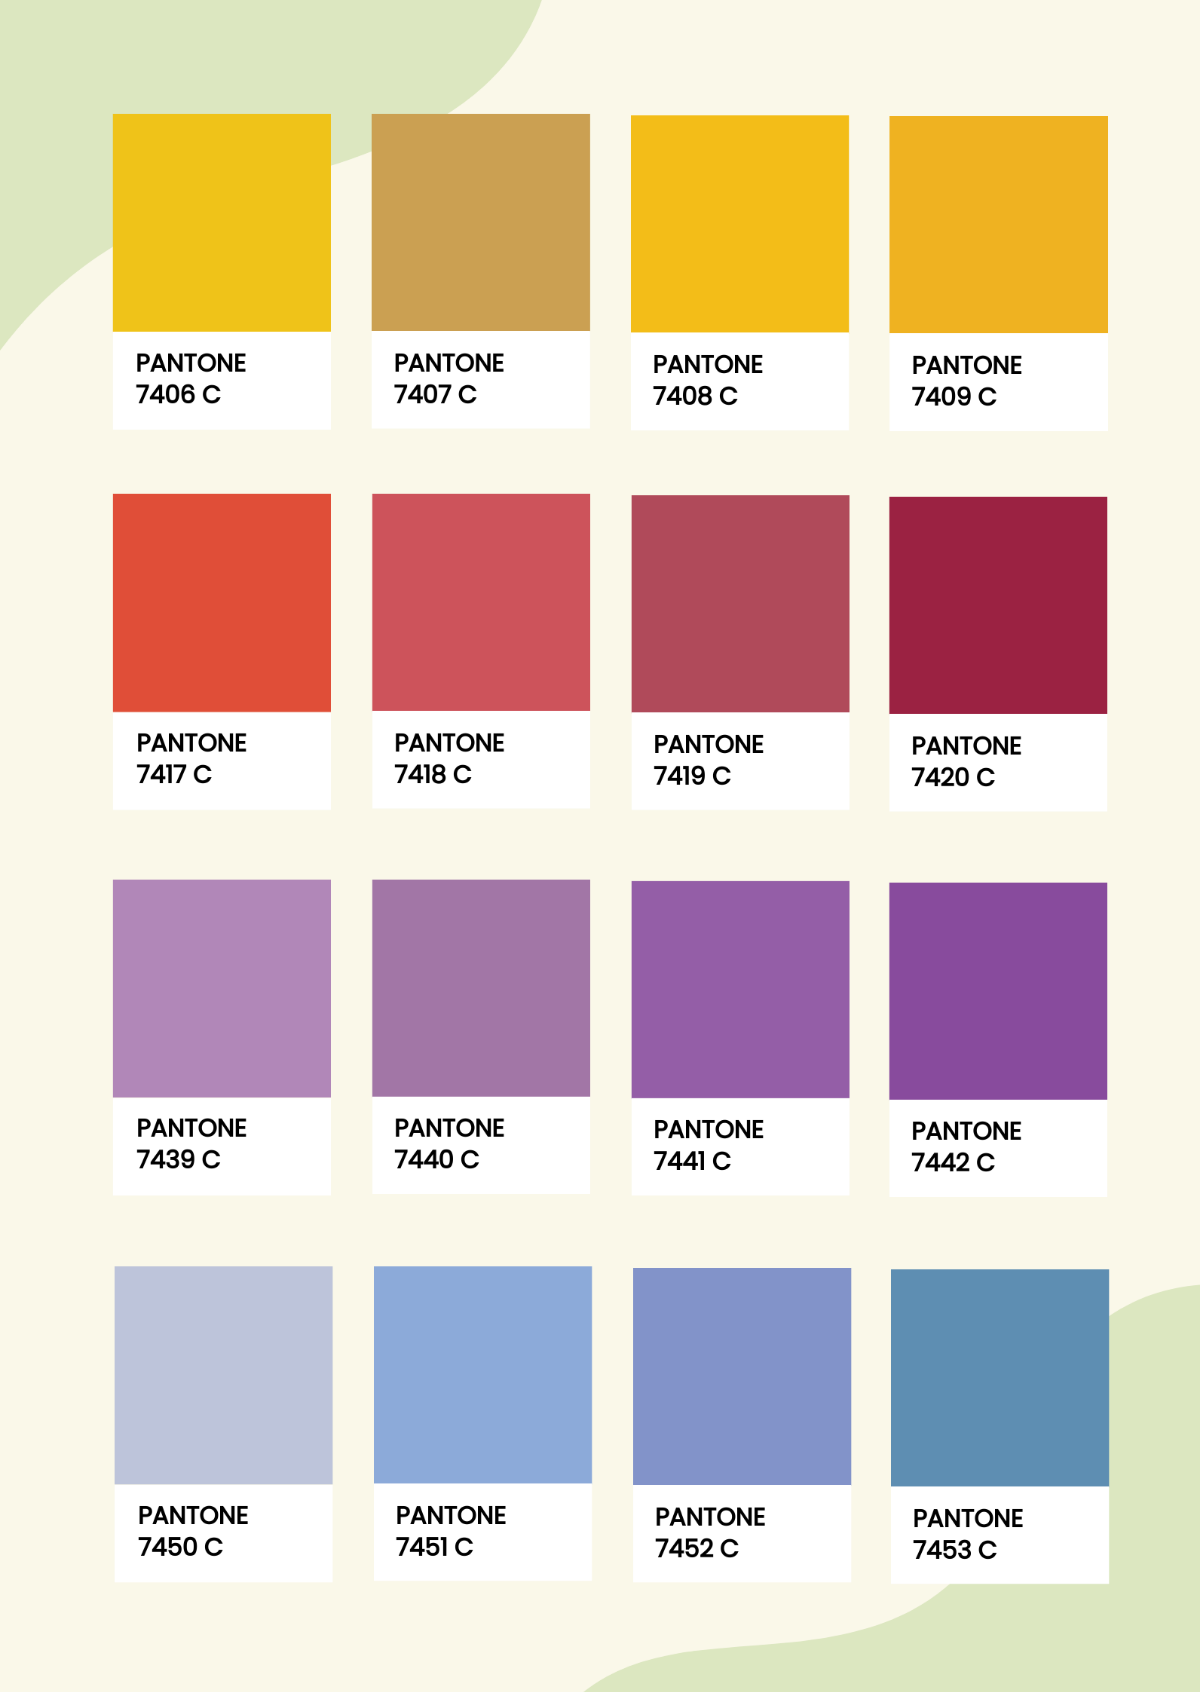 Pantone Coated Color Chart Template